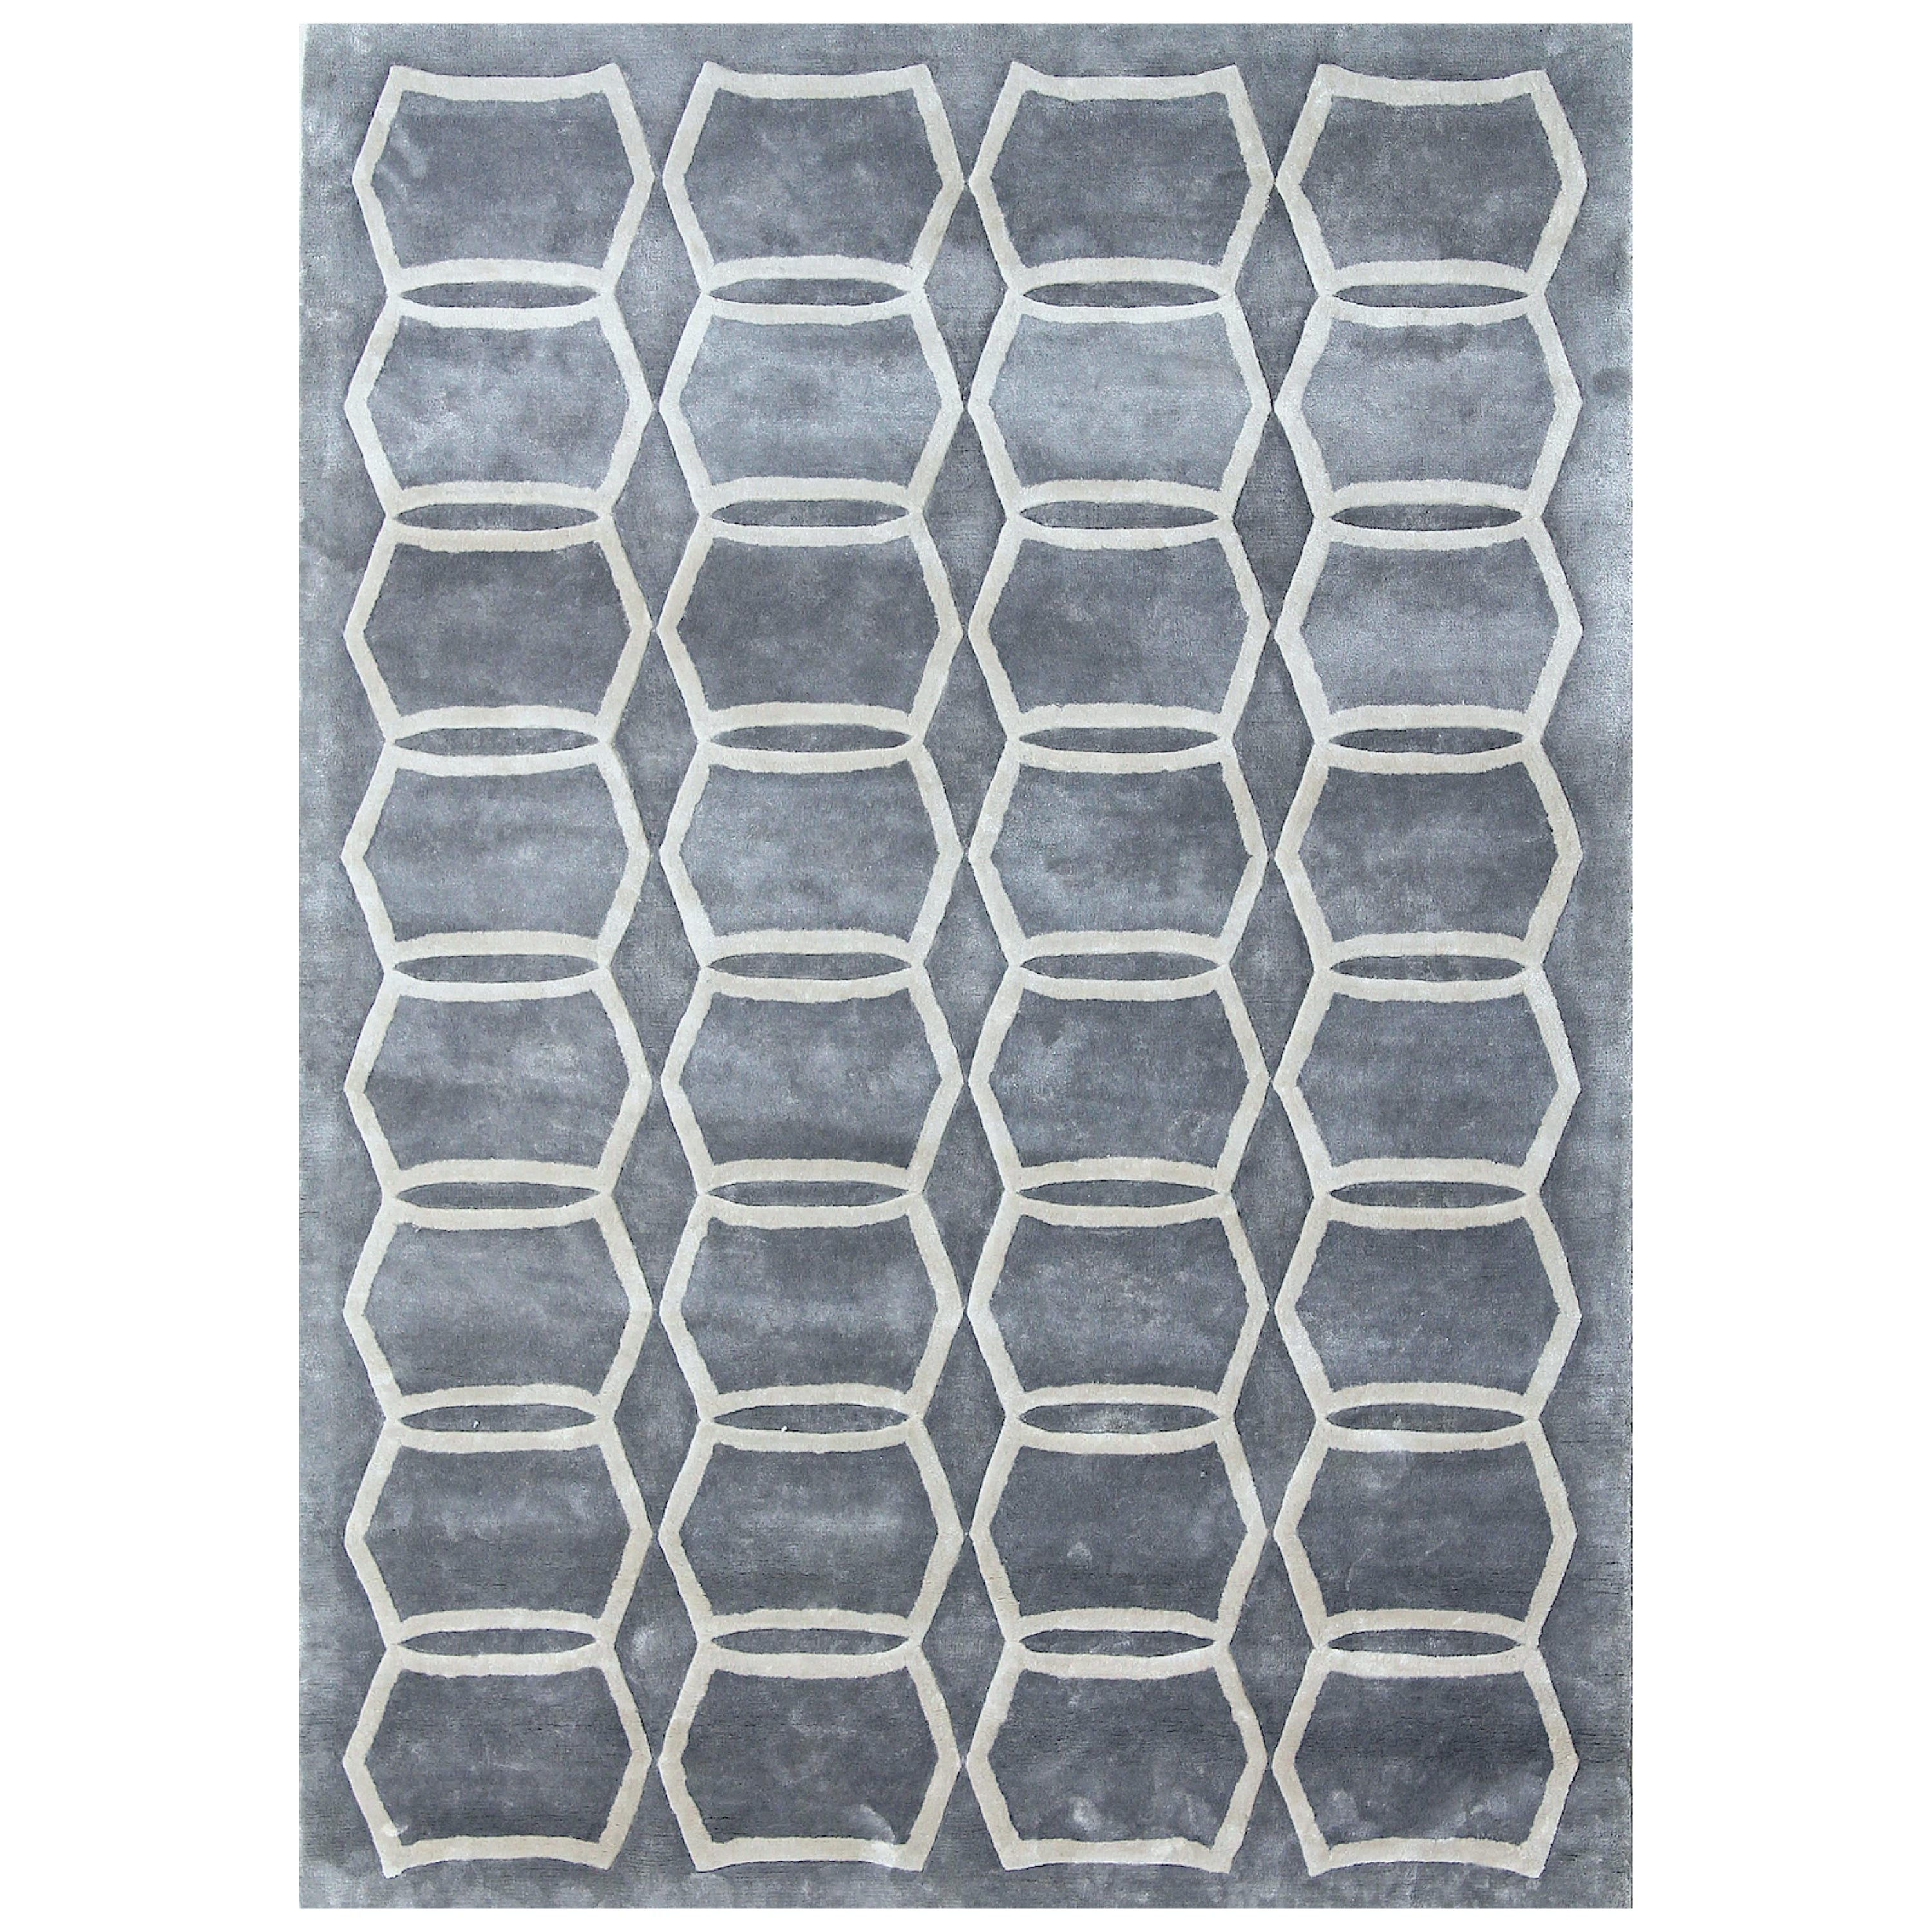 TRAPEZA Hand Tufted Modern Geometric Silk Rug in Taupe Grey Colour By Hands